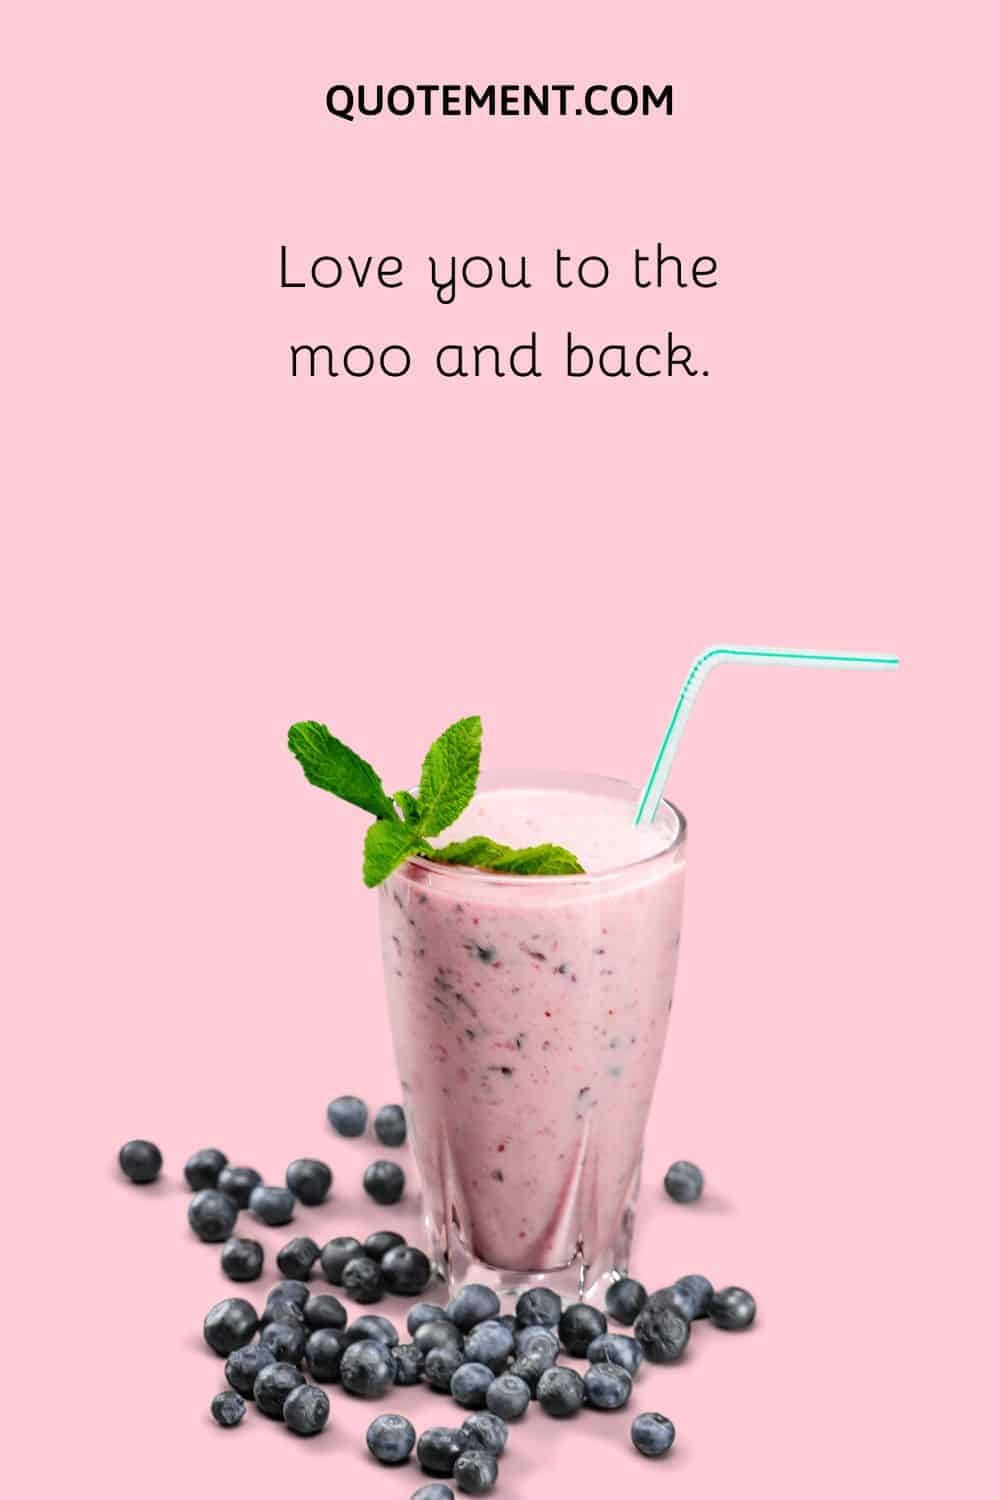 Love you to the moo and back.